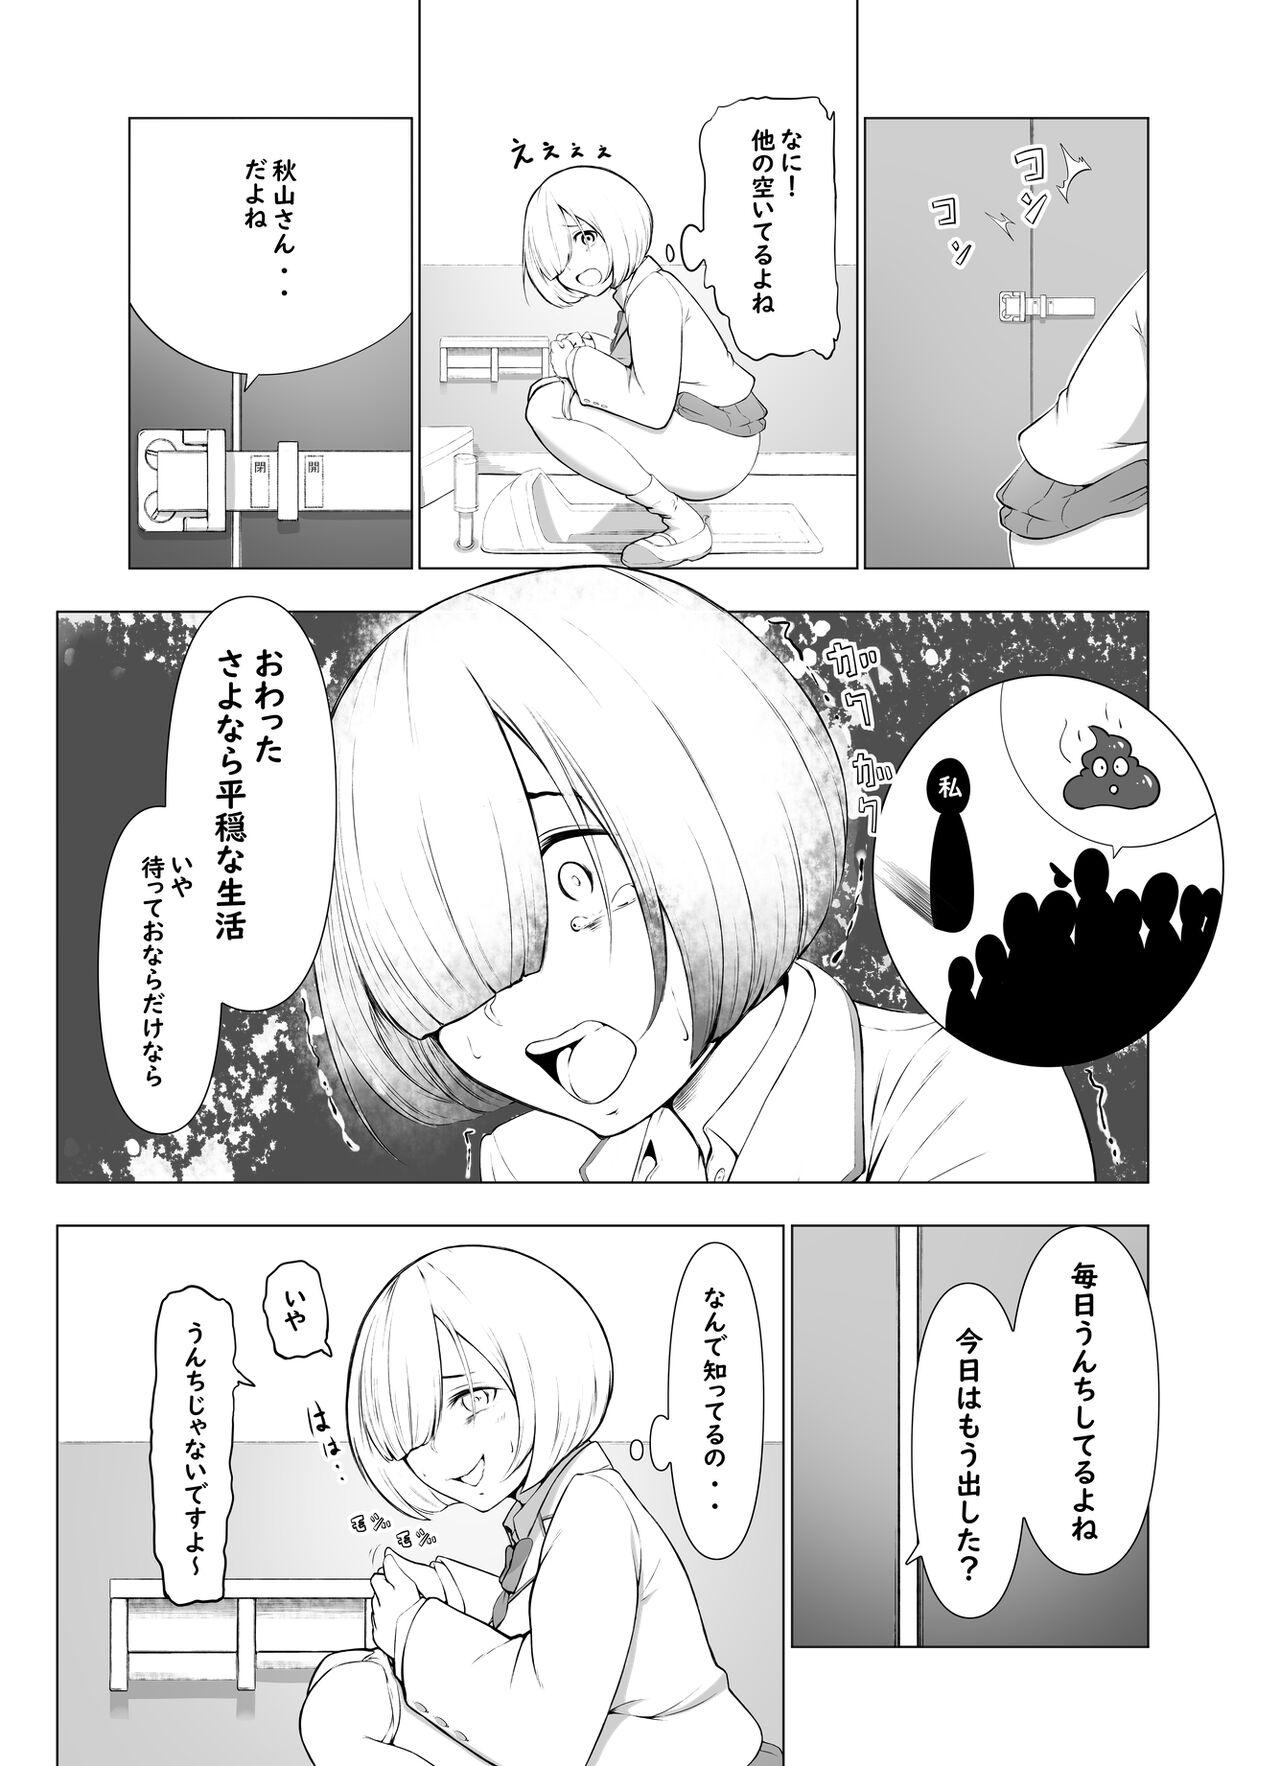 Vintage 【脱糞漫画】トイレの音【８P】 Spanking - Page 4